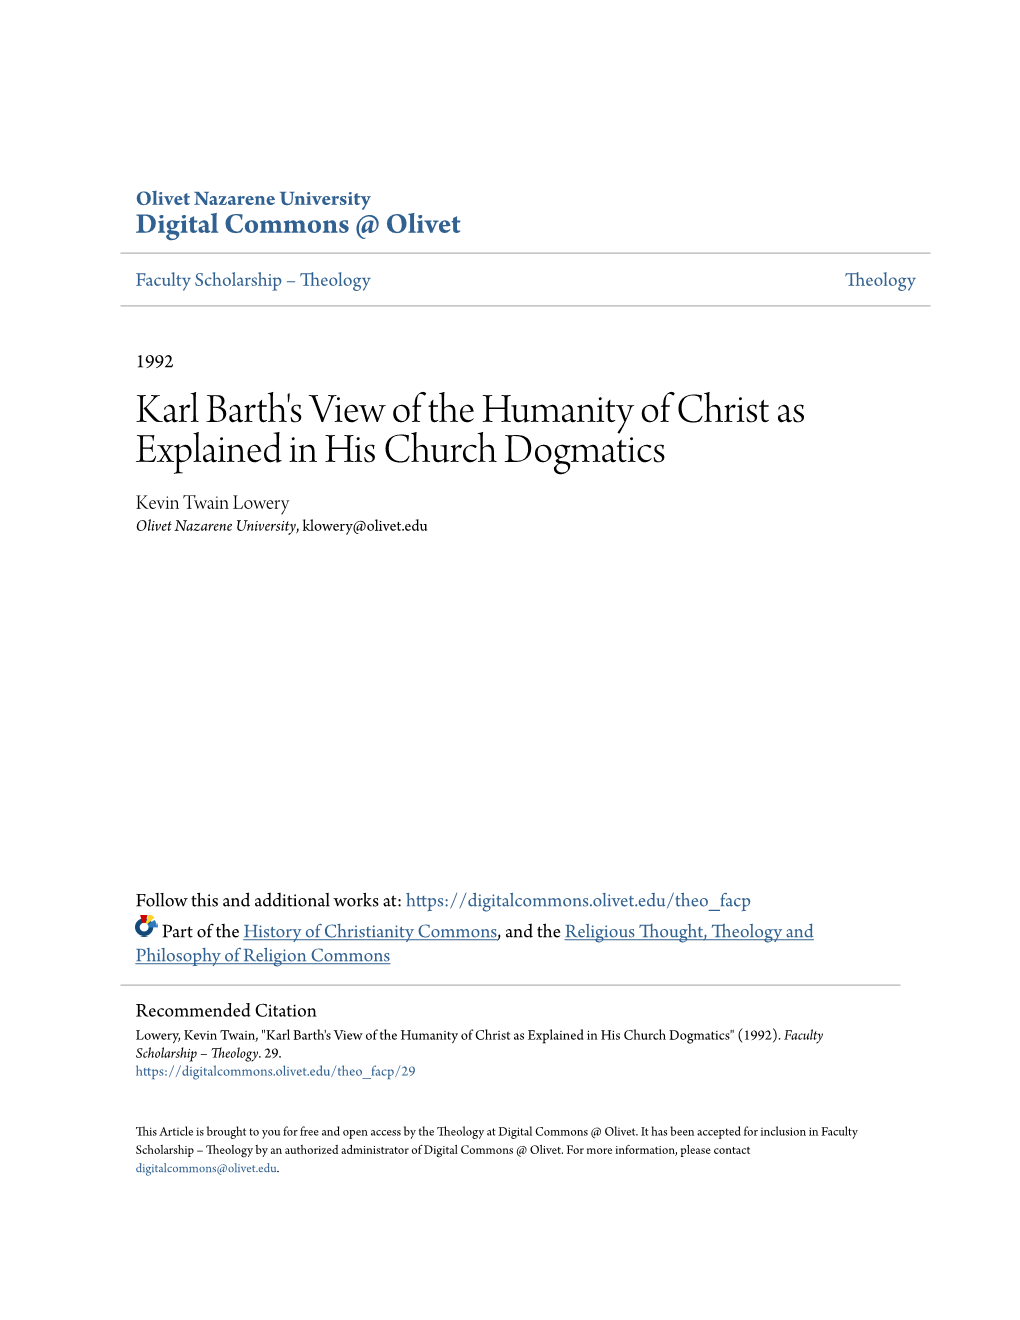 Karl Barth's View of the Humanity of Christ As Explained in His Church Dogmatics Kevin Twain Lowery Olivet Nazarene University, Klowery@Olivet.Edu